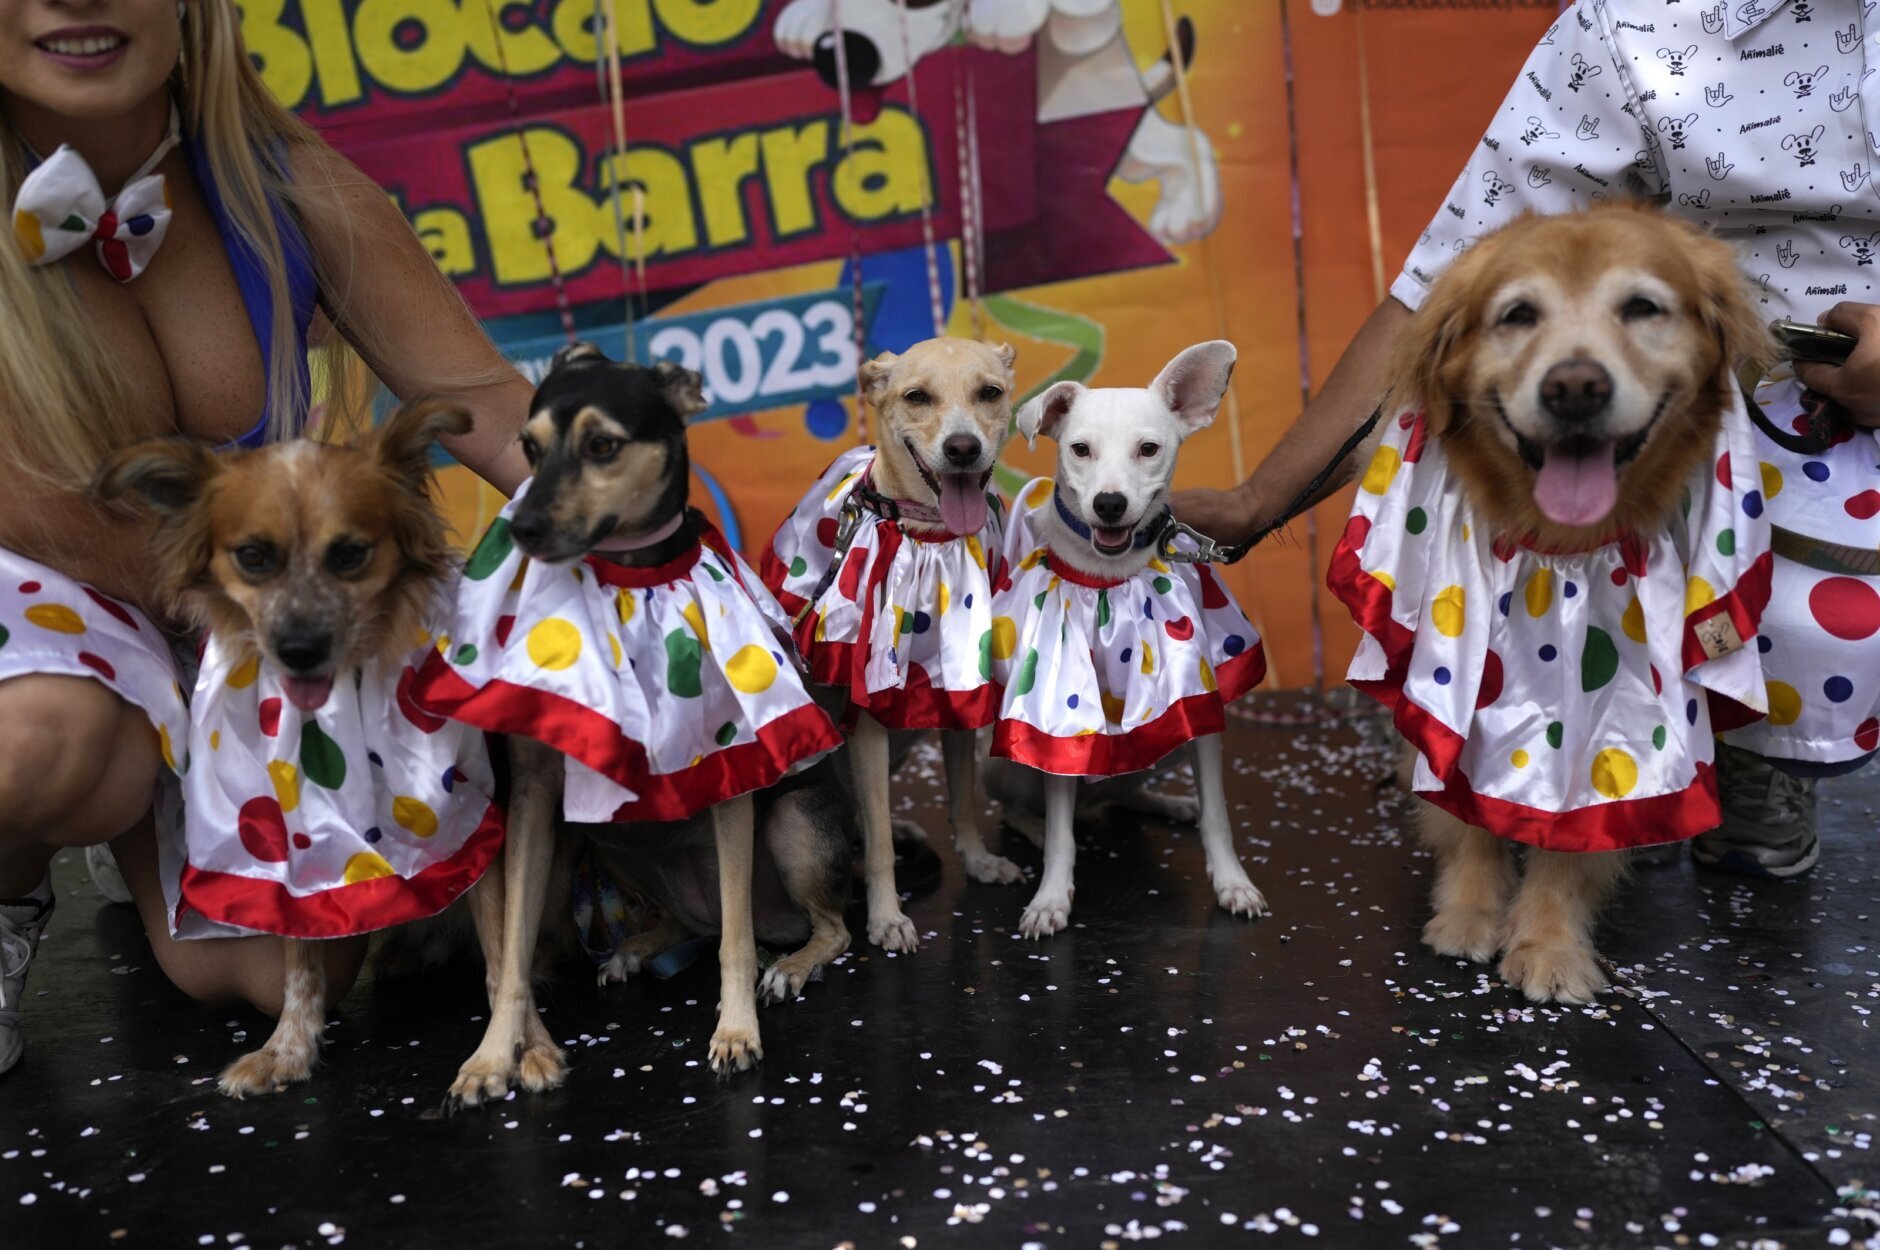 Dogs in costumes take over at Rio Carnival street party - WTOP News